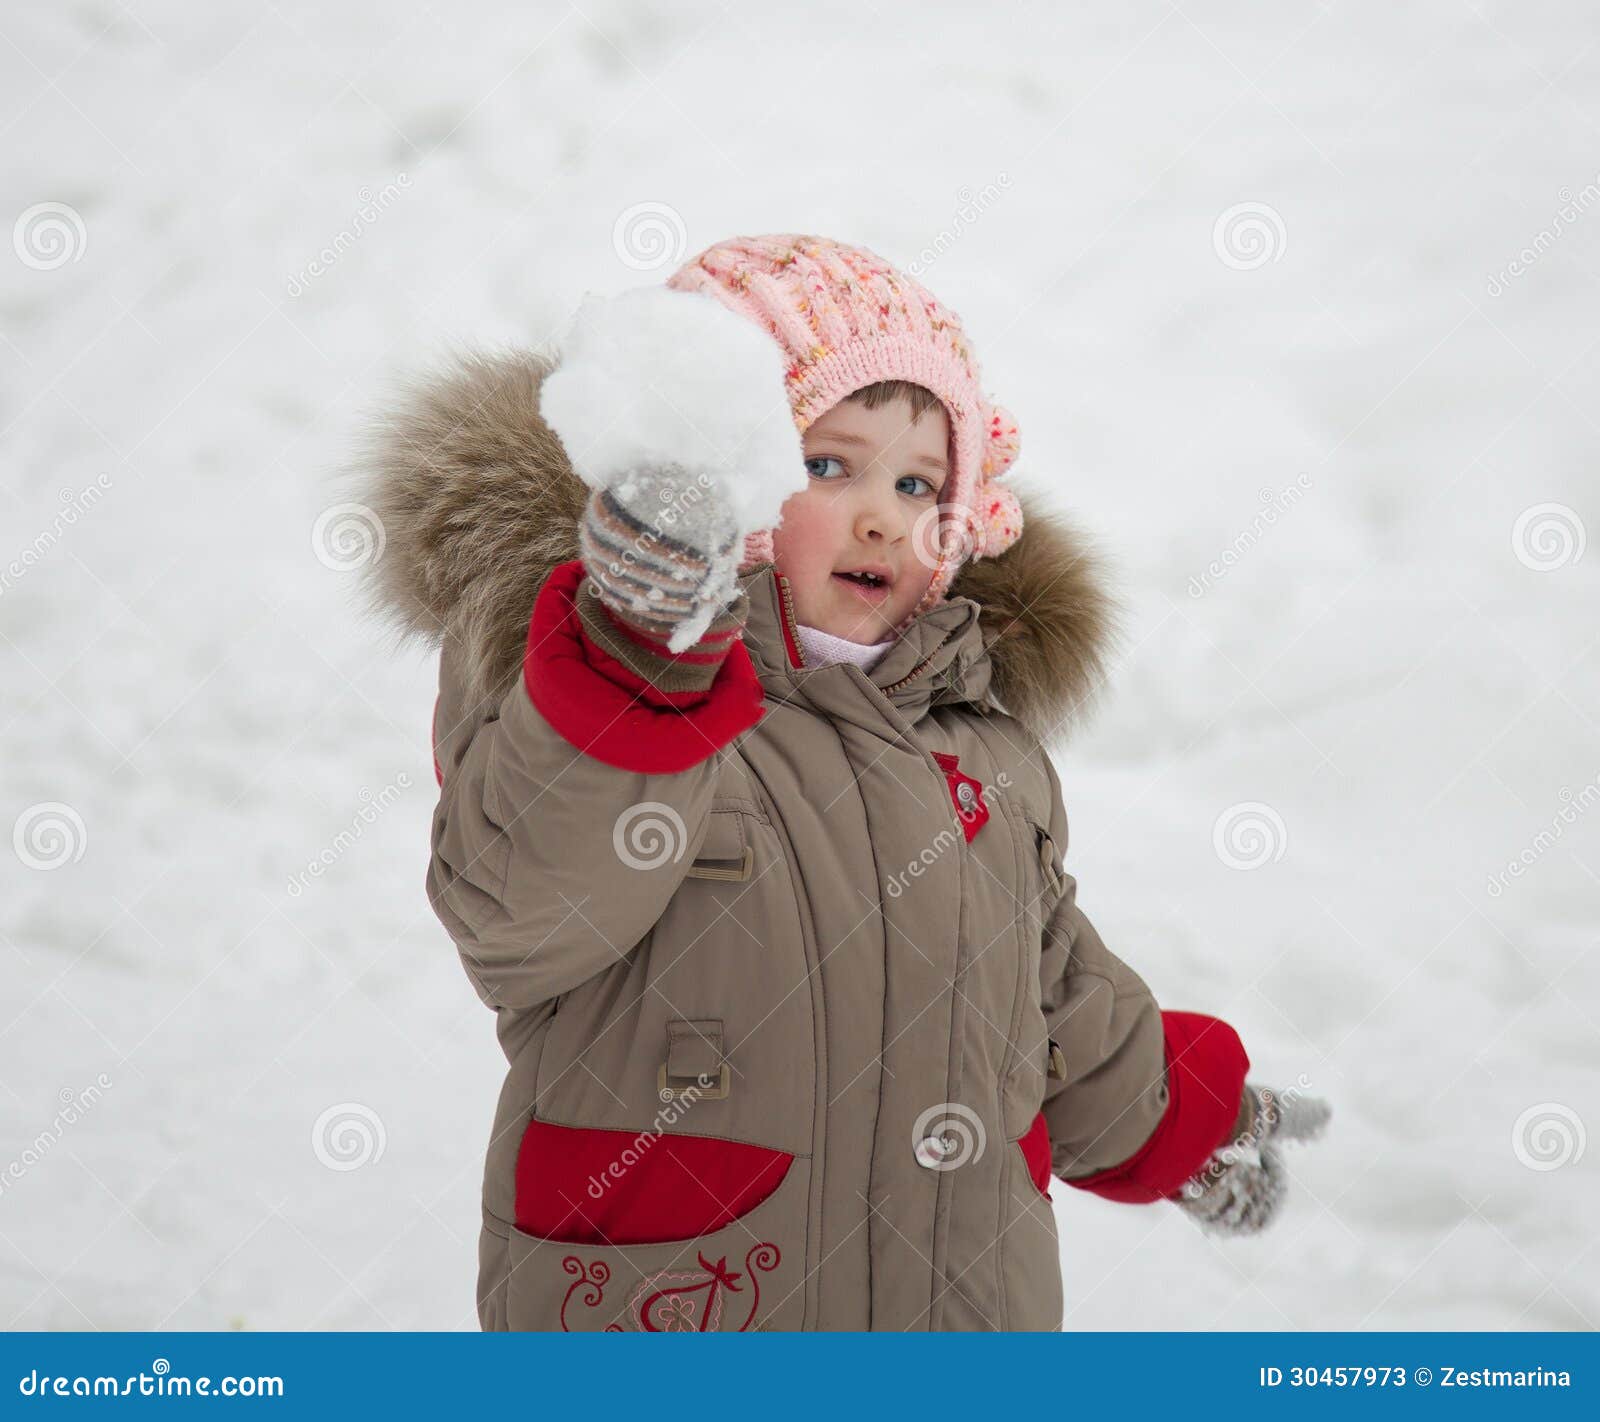 Child Playing with Snowballs Stock Image - Image of play, girl: 30457973